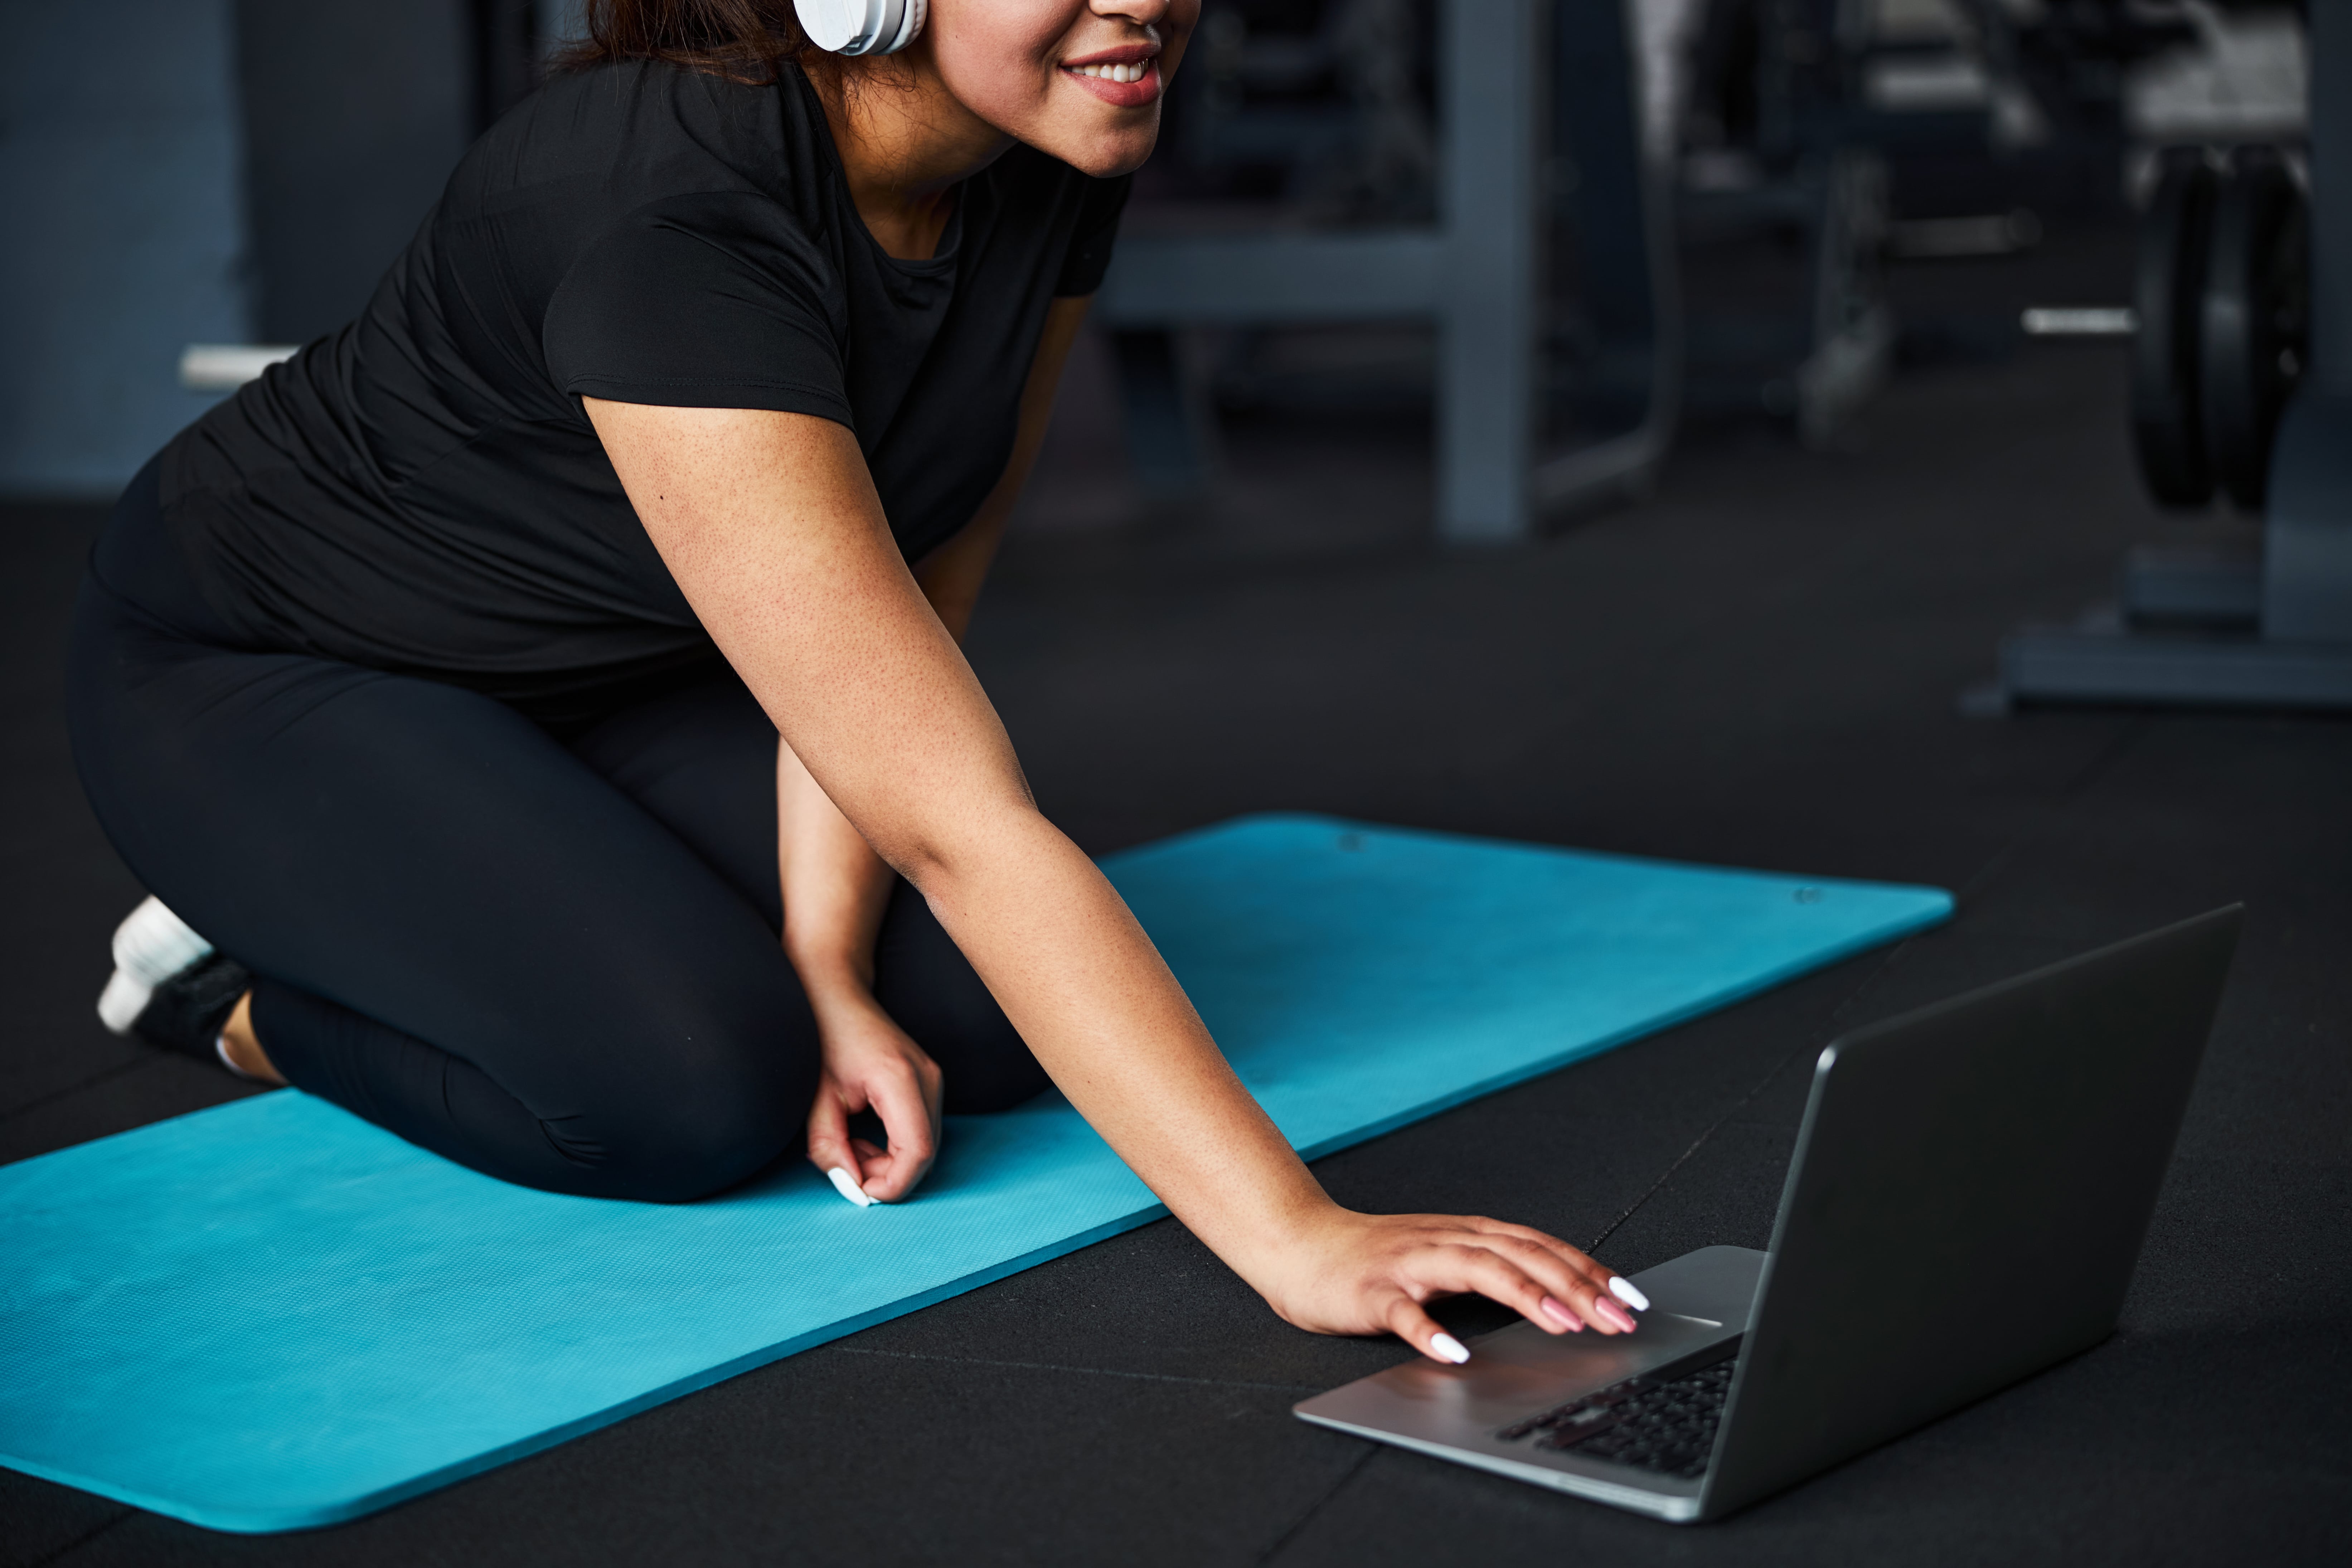 serene-female-exercising-in-gym-online-with-gadget-2021-09-03-07-04-04-utc-min